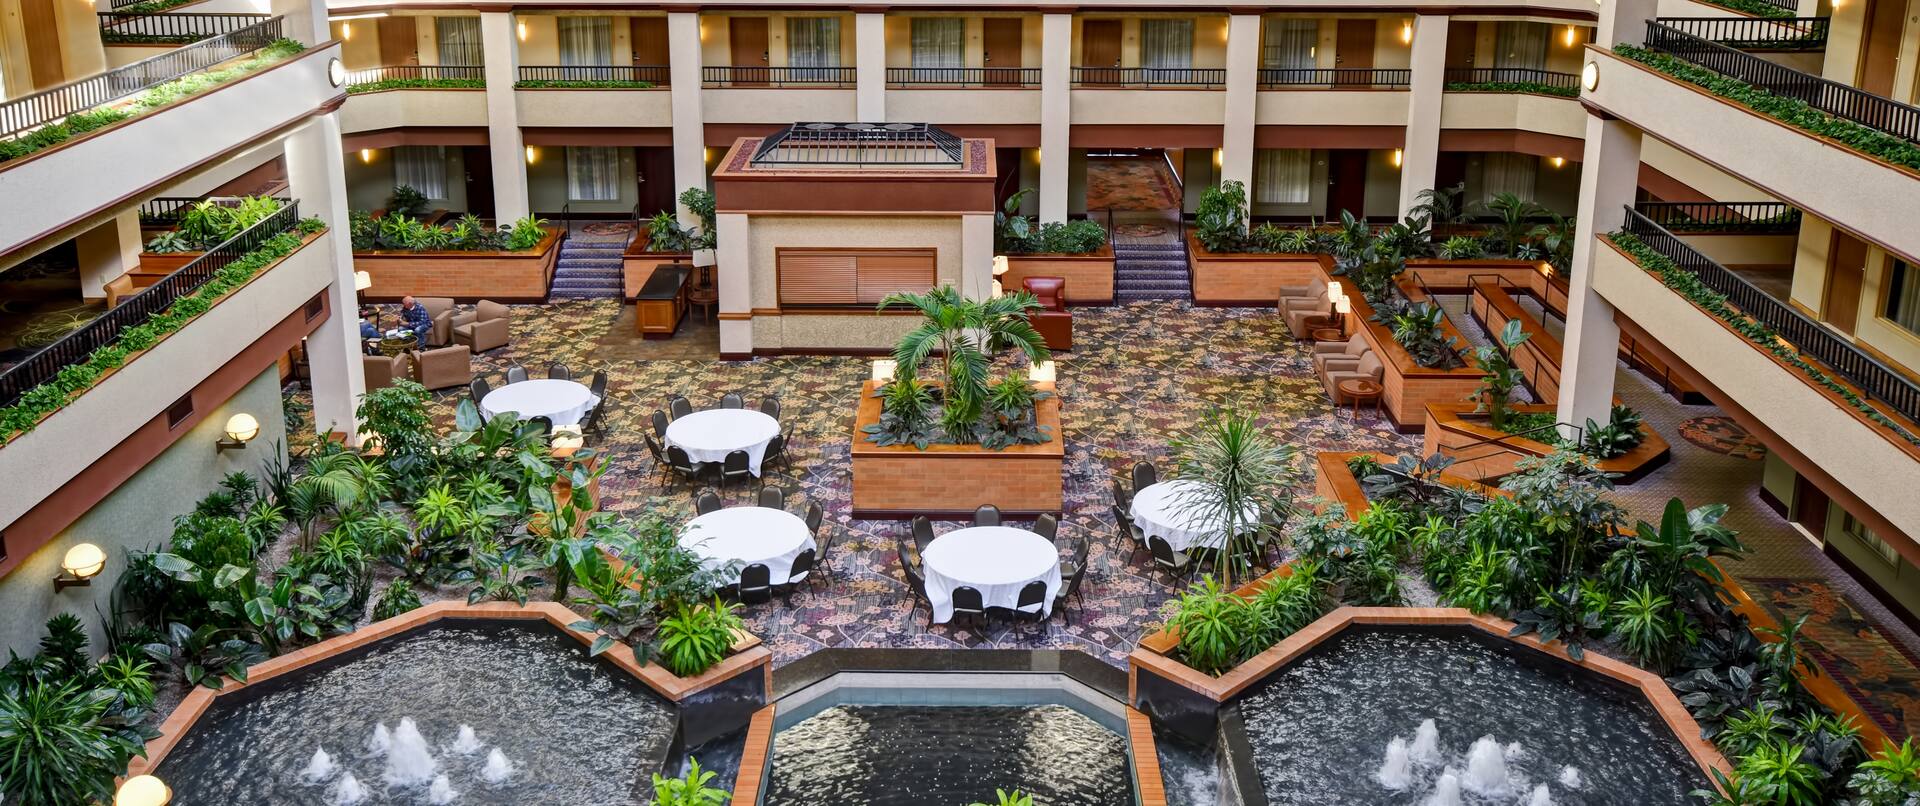 overview of hotel atrium, dining tables, water fountains